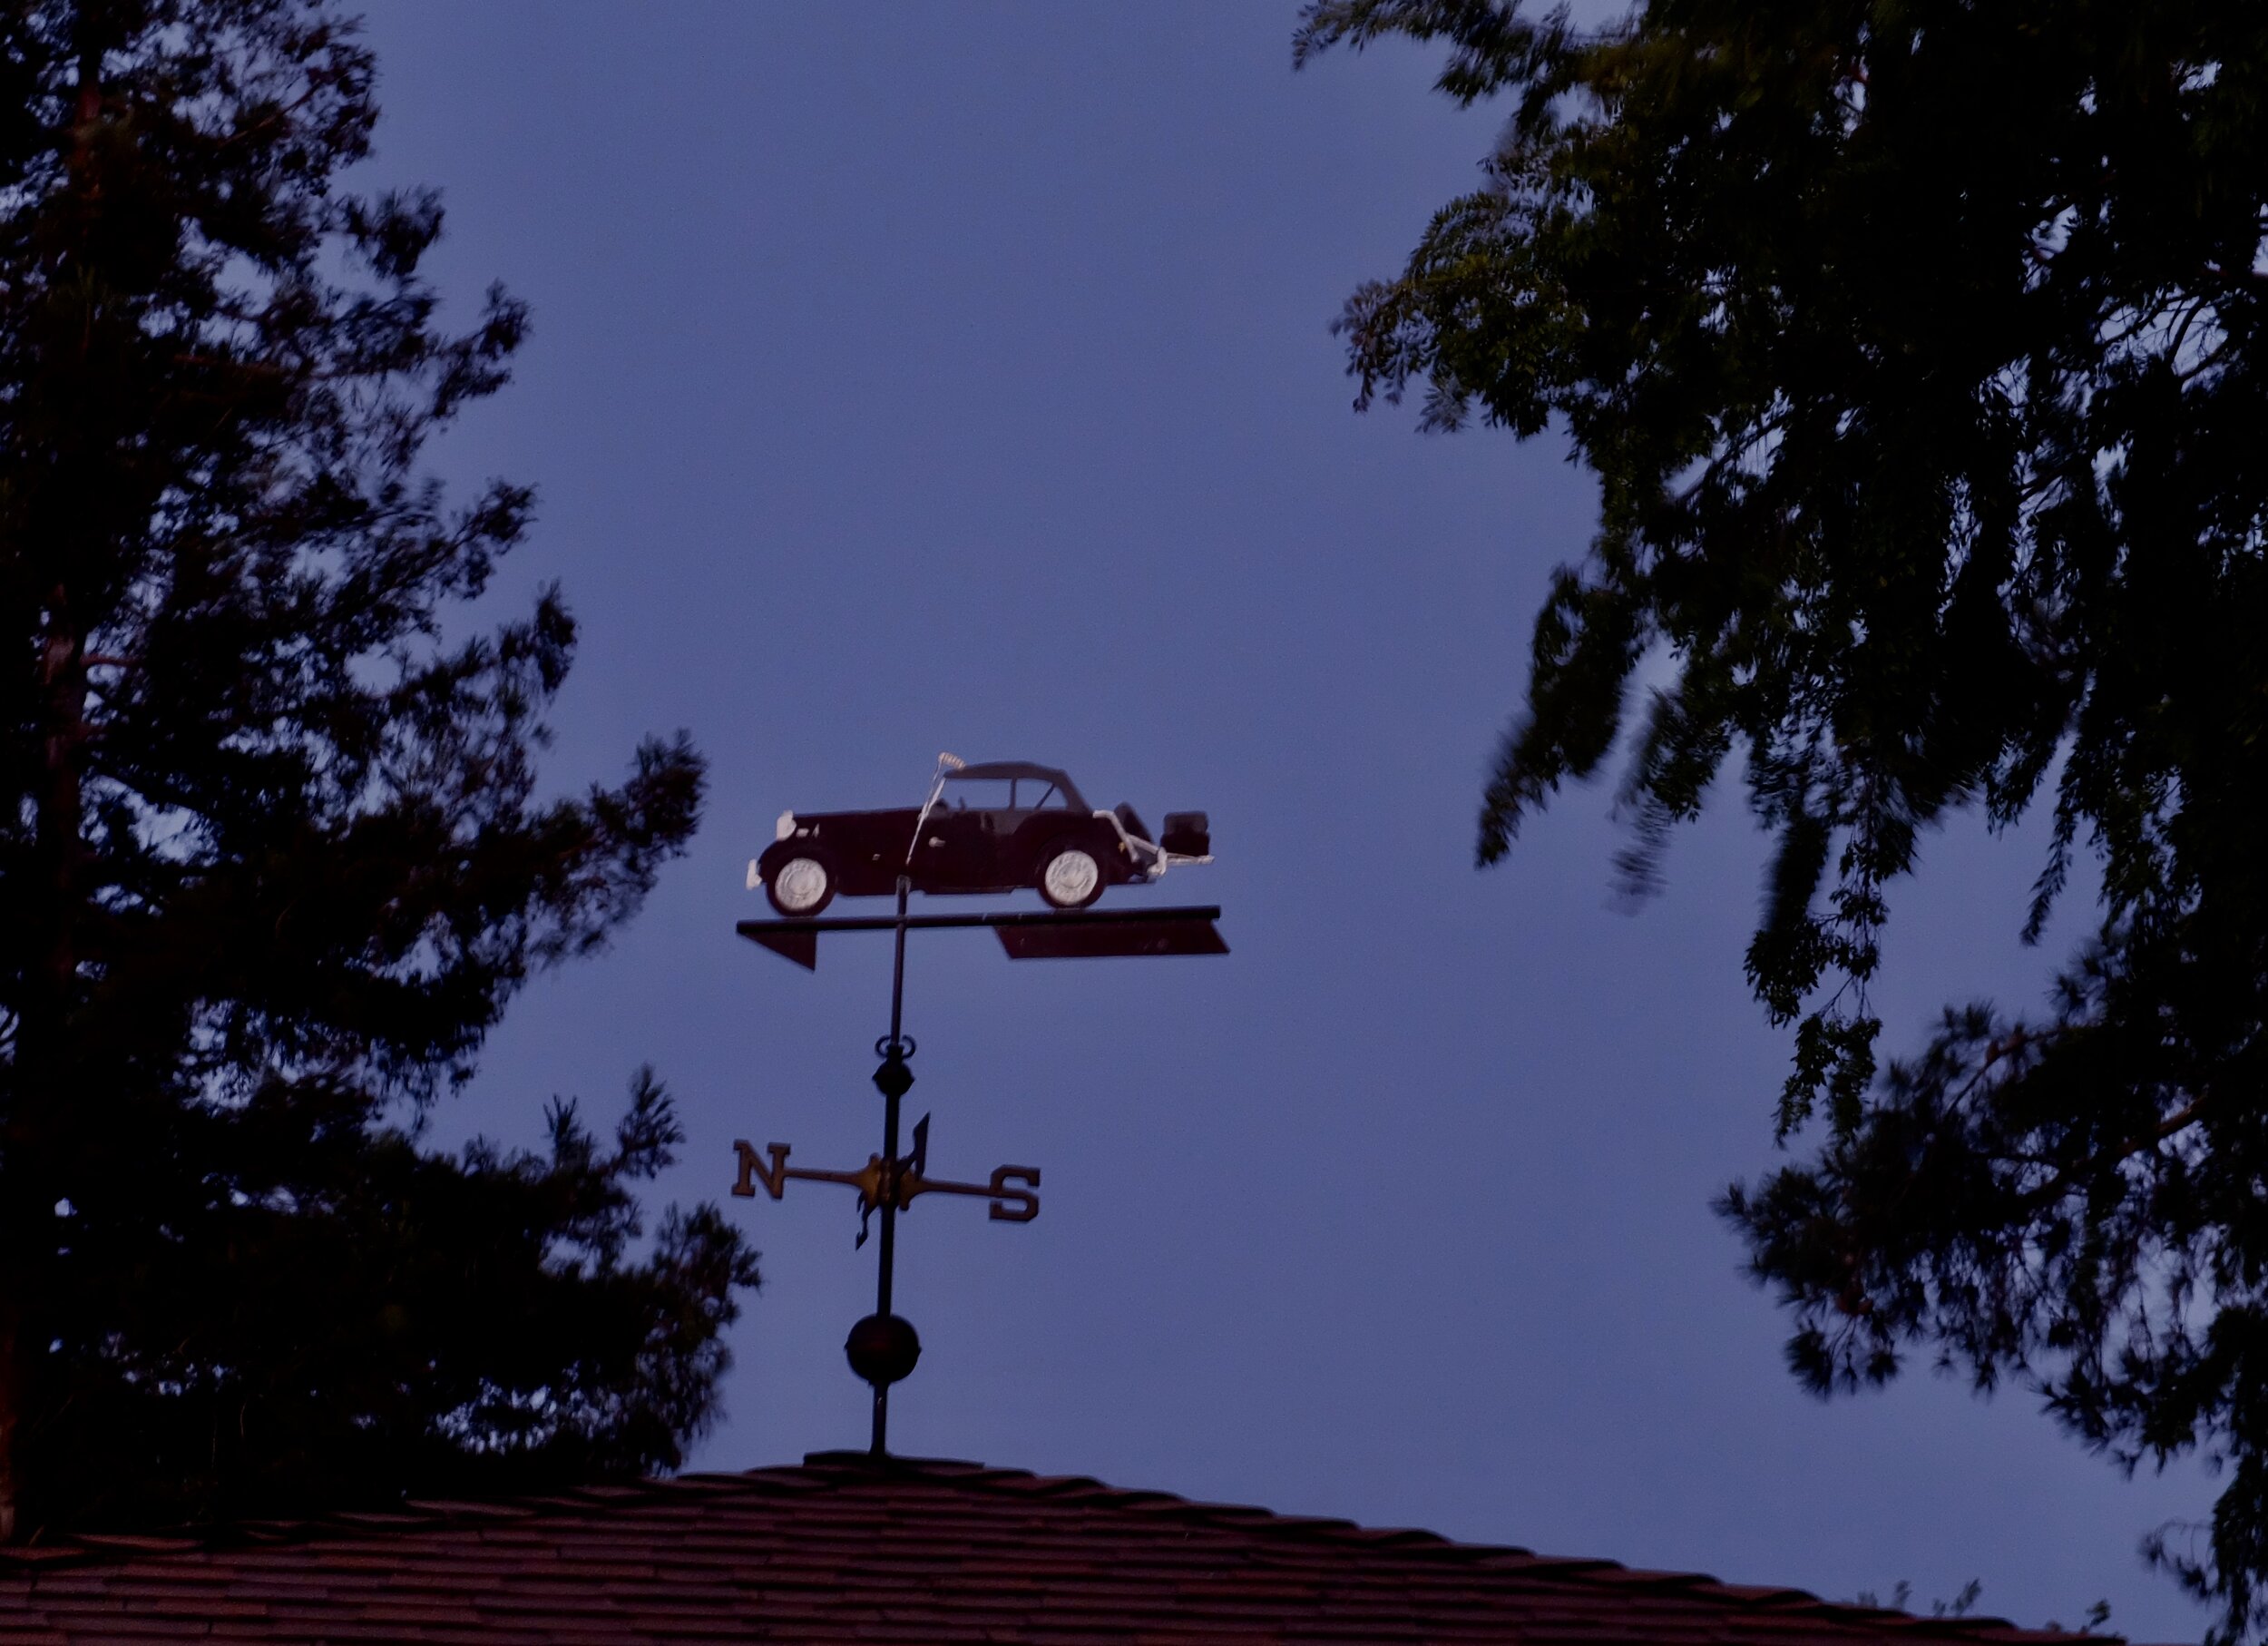 Sunset, right before the full moon appeared behind the MG TD weathervane.